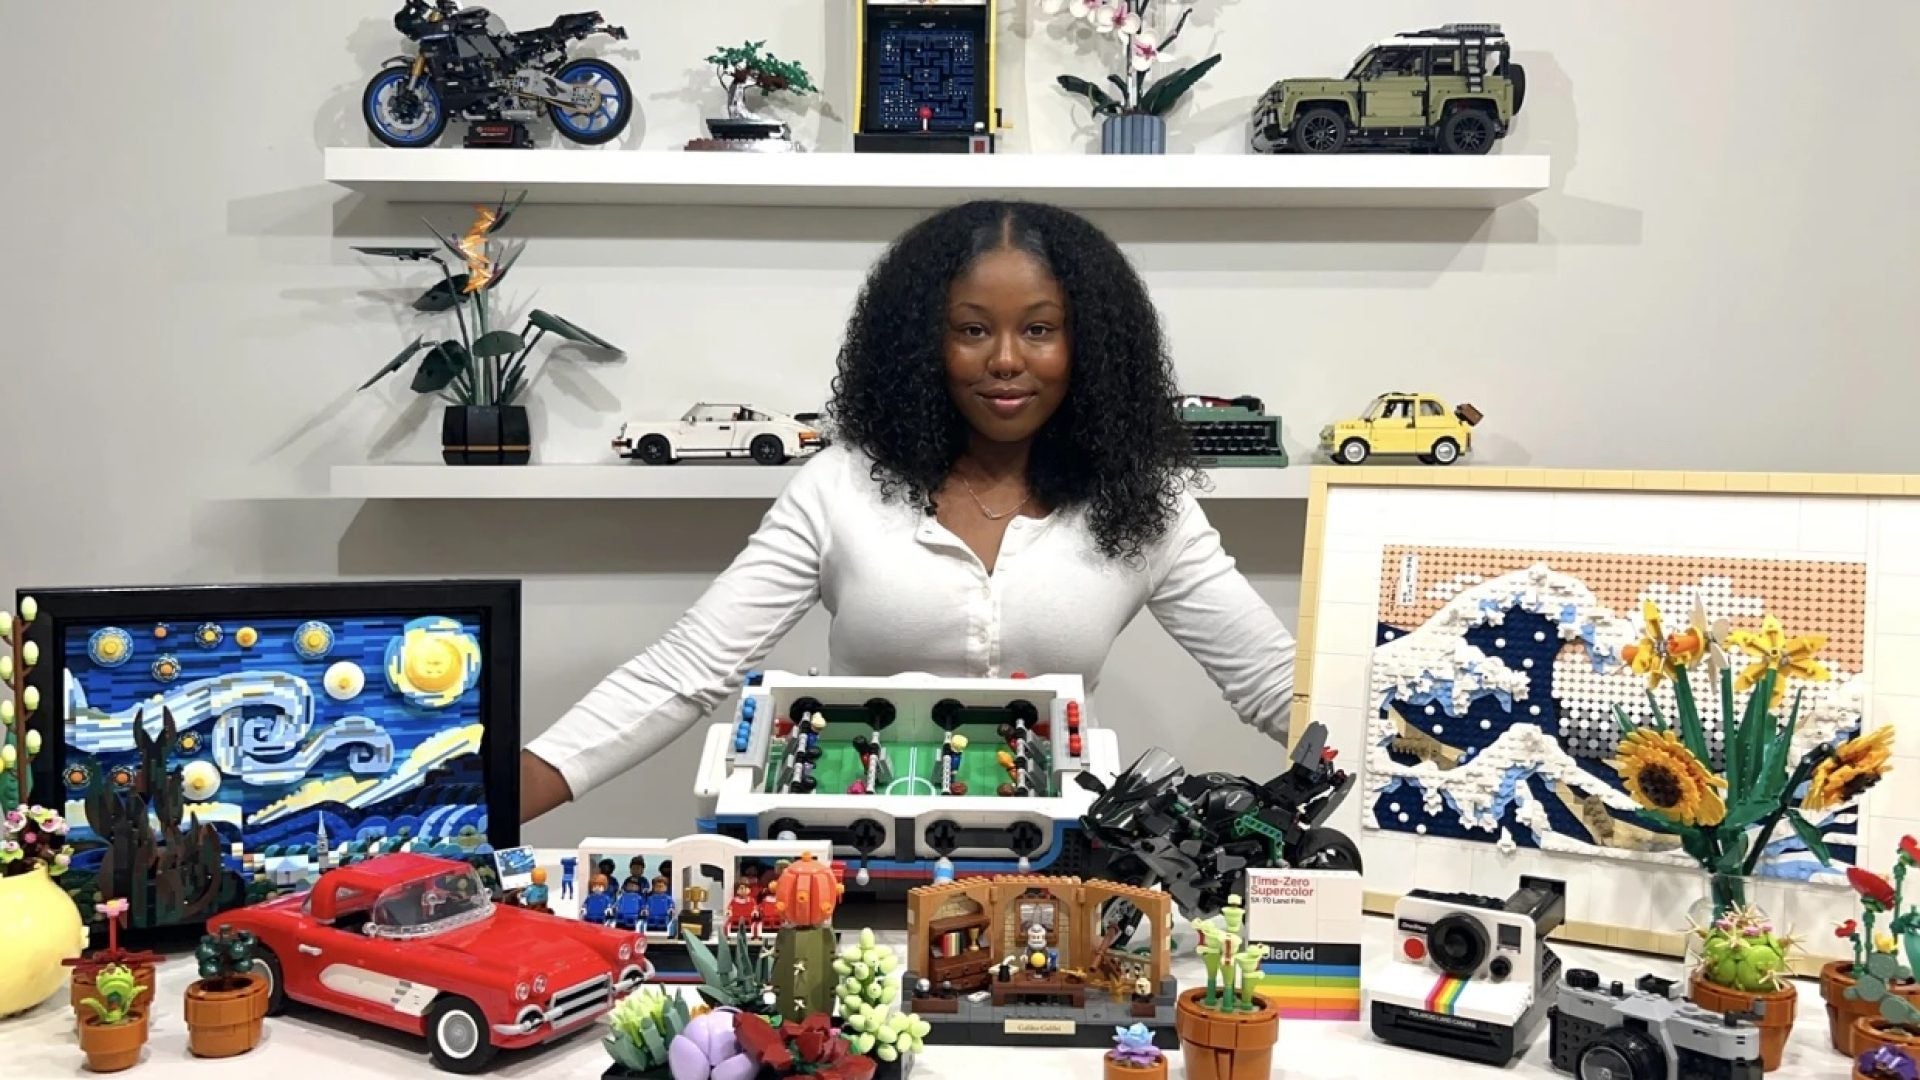 Black Women Spark New Trend By Sharing Amazing Lego Collections On Social Media